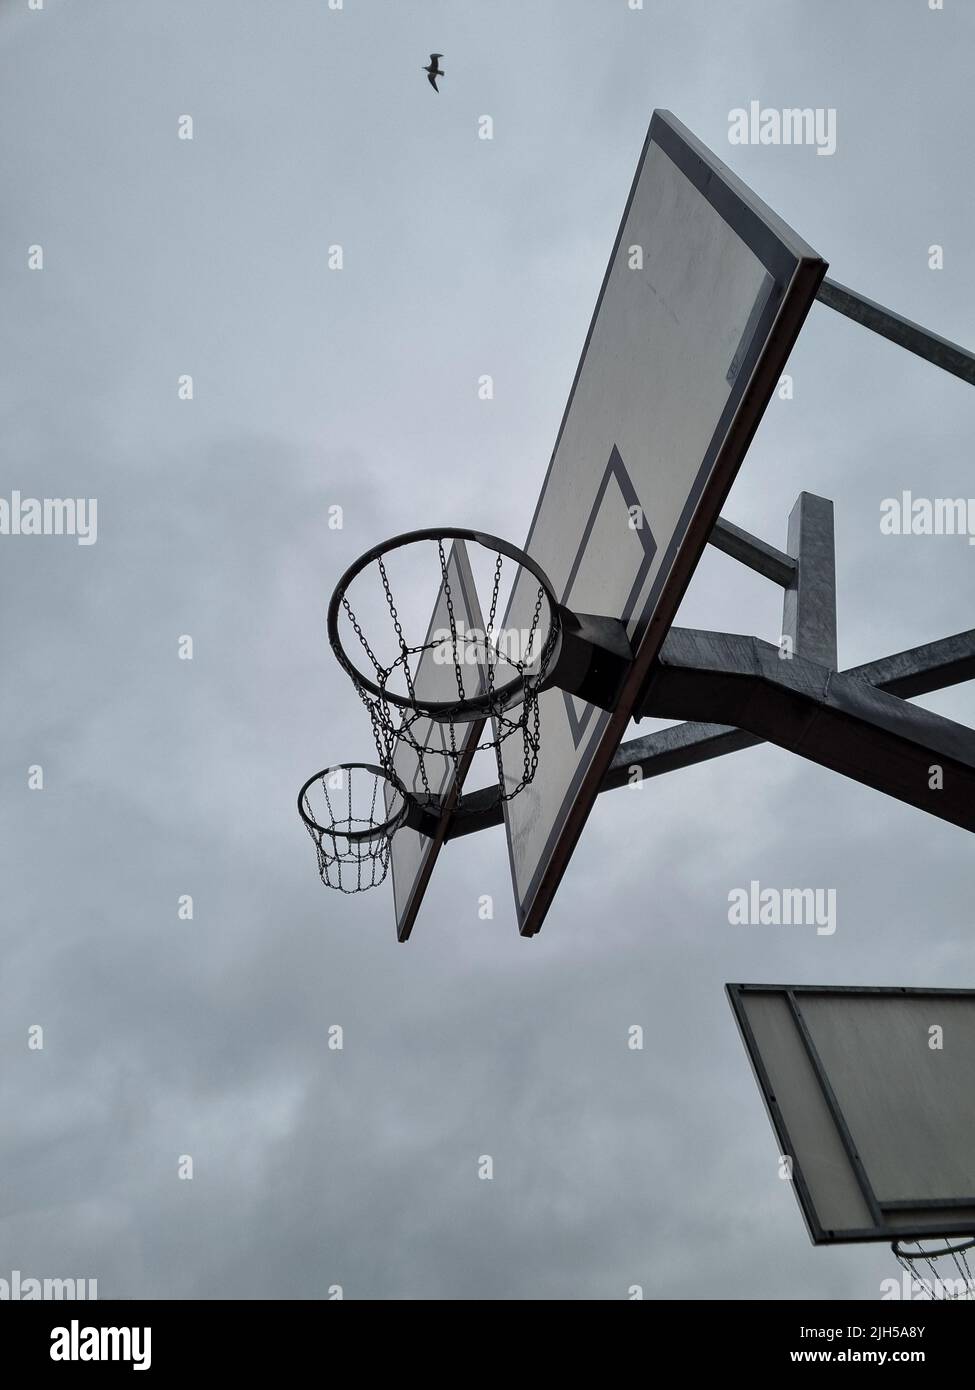 Outdoor basketball rings with chain nets at different levels. Street basketball hoop with a view from below. Street sport during overcast. Stock Photo